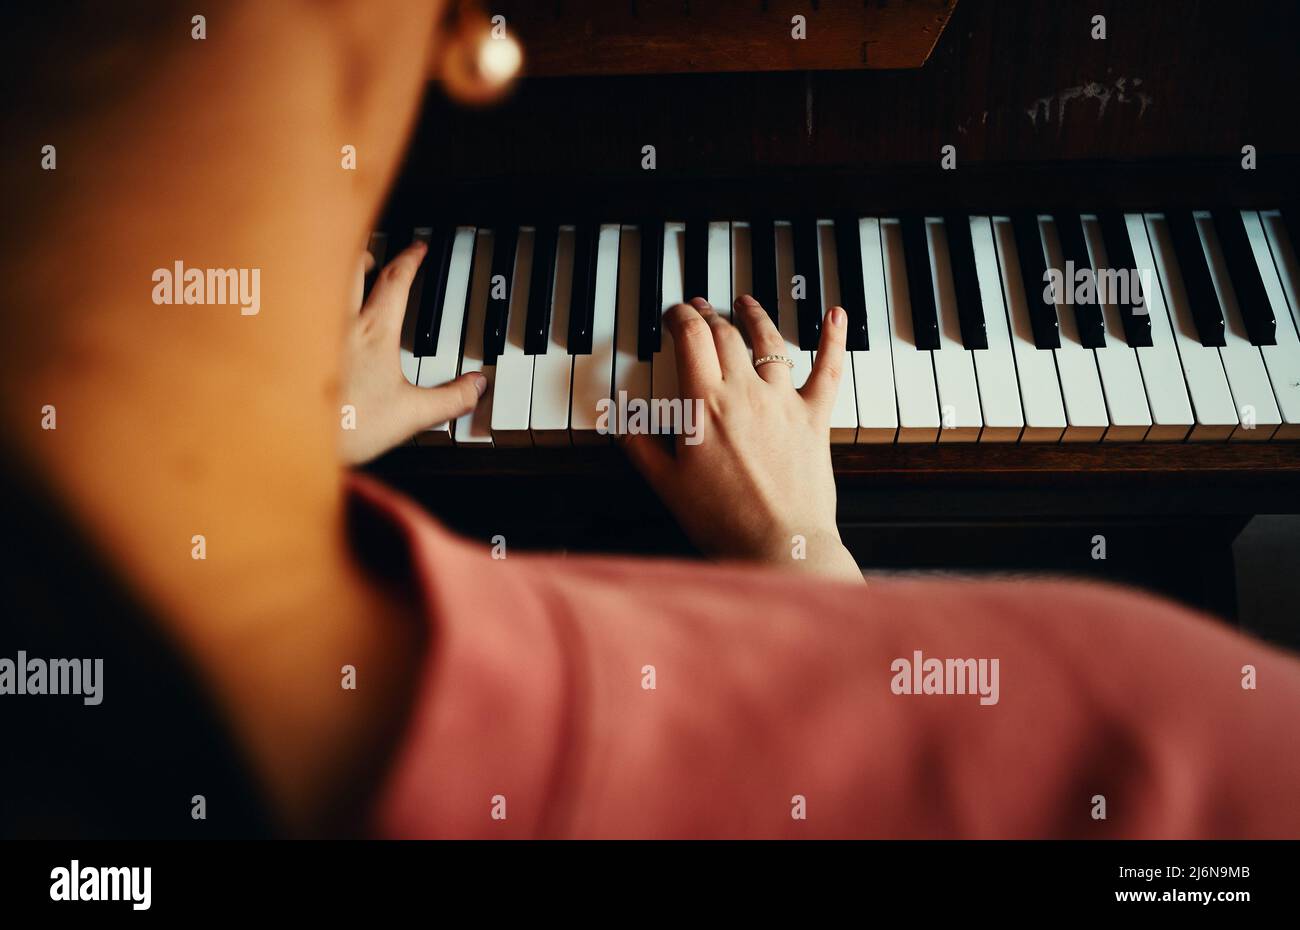 Girl is practicing playing the piano, close-up view. Stock Photo